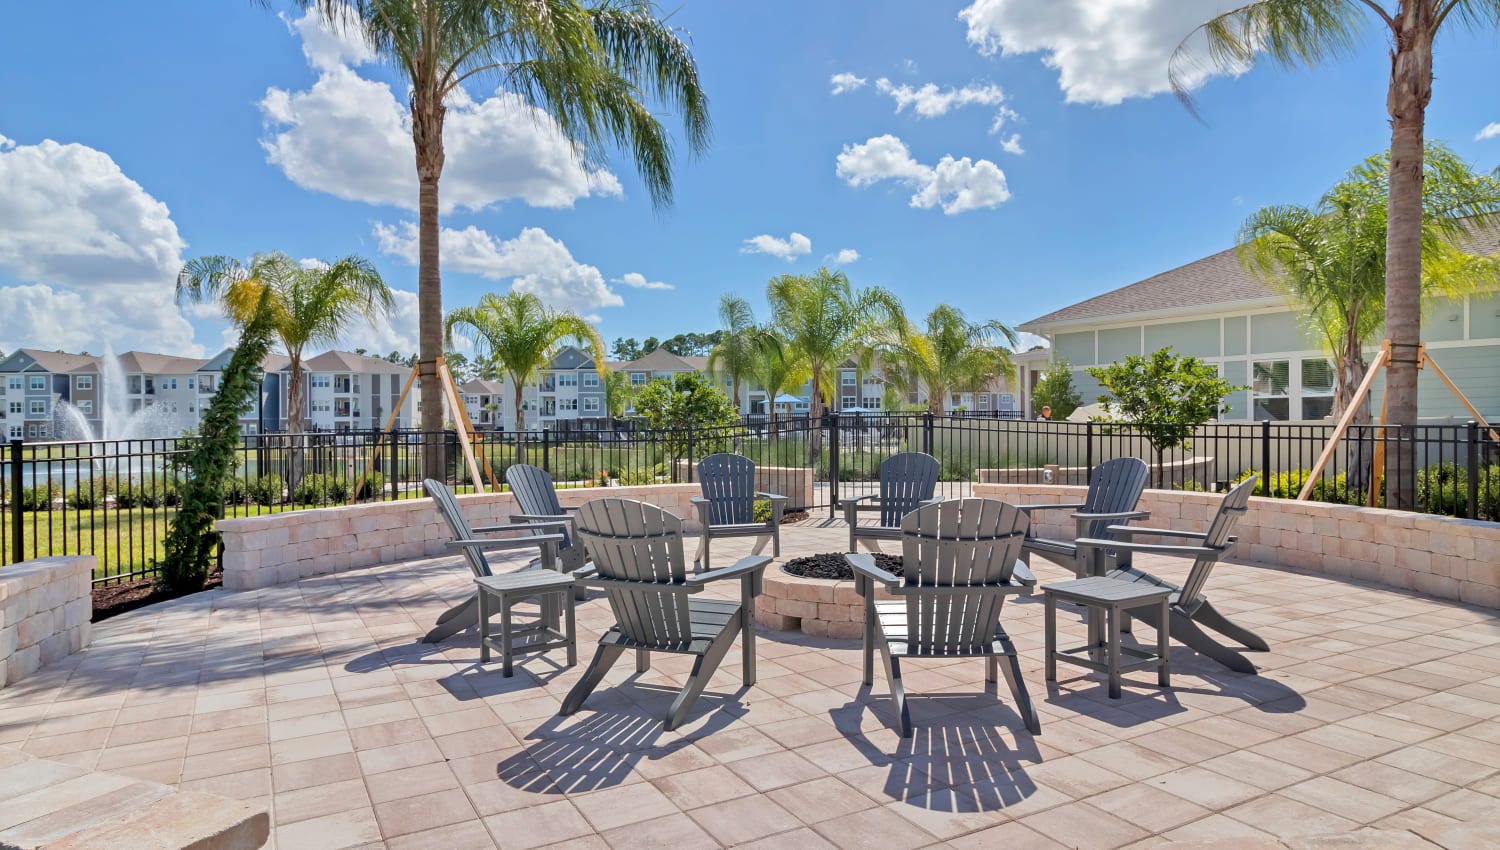 Firepit and social area at The Carlton at Bartram Park in Jacksonville, Florida